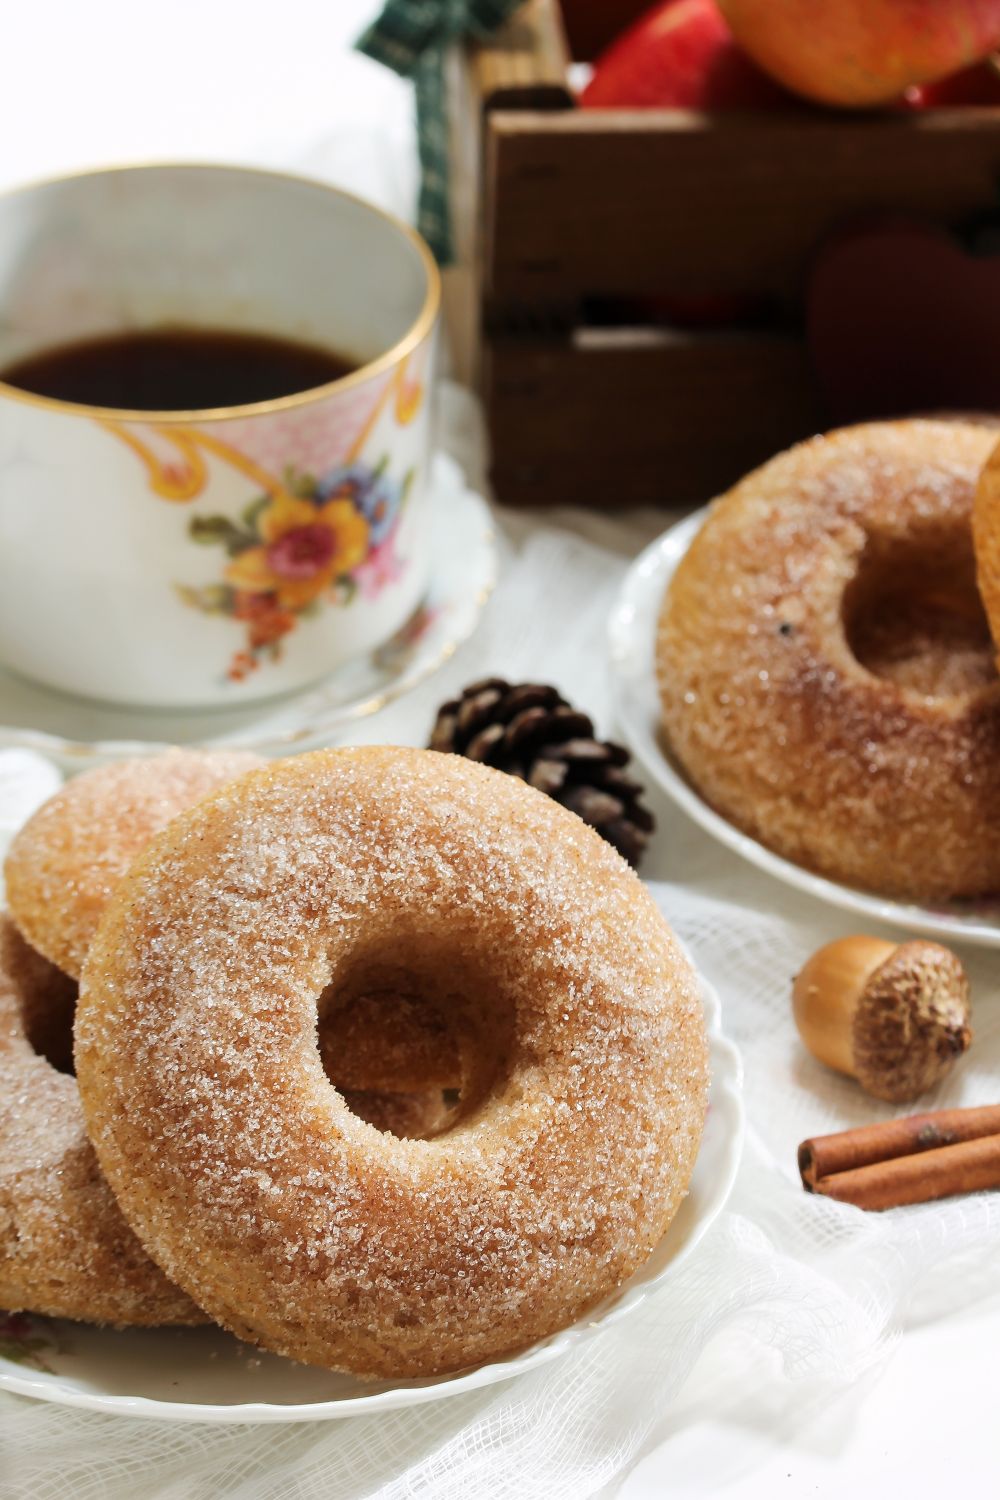 Skinny low-fat cinnamon and granulated erythritol-coated baked doughnuts